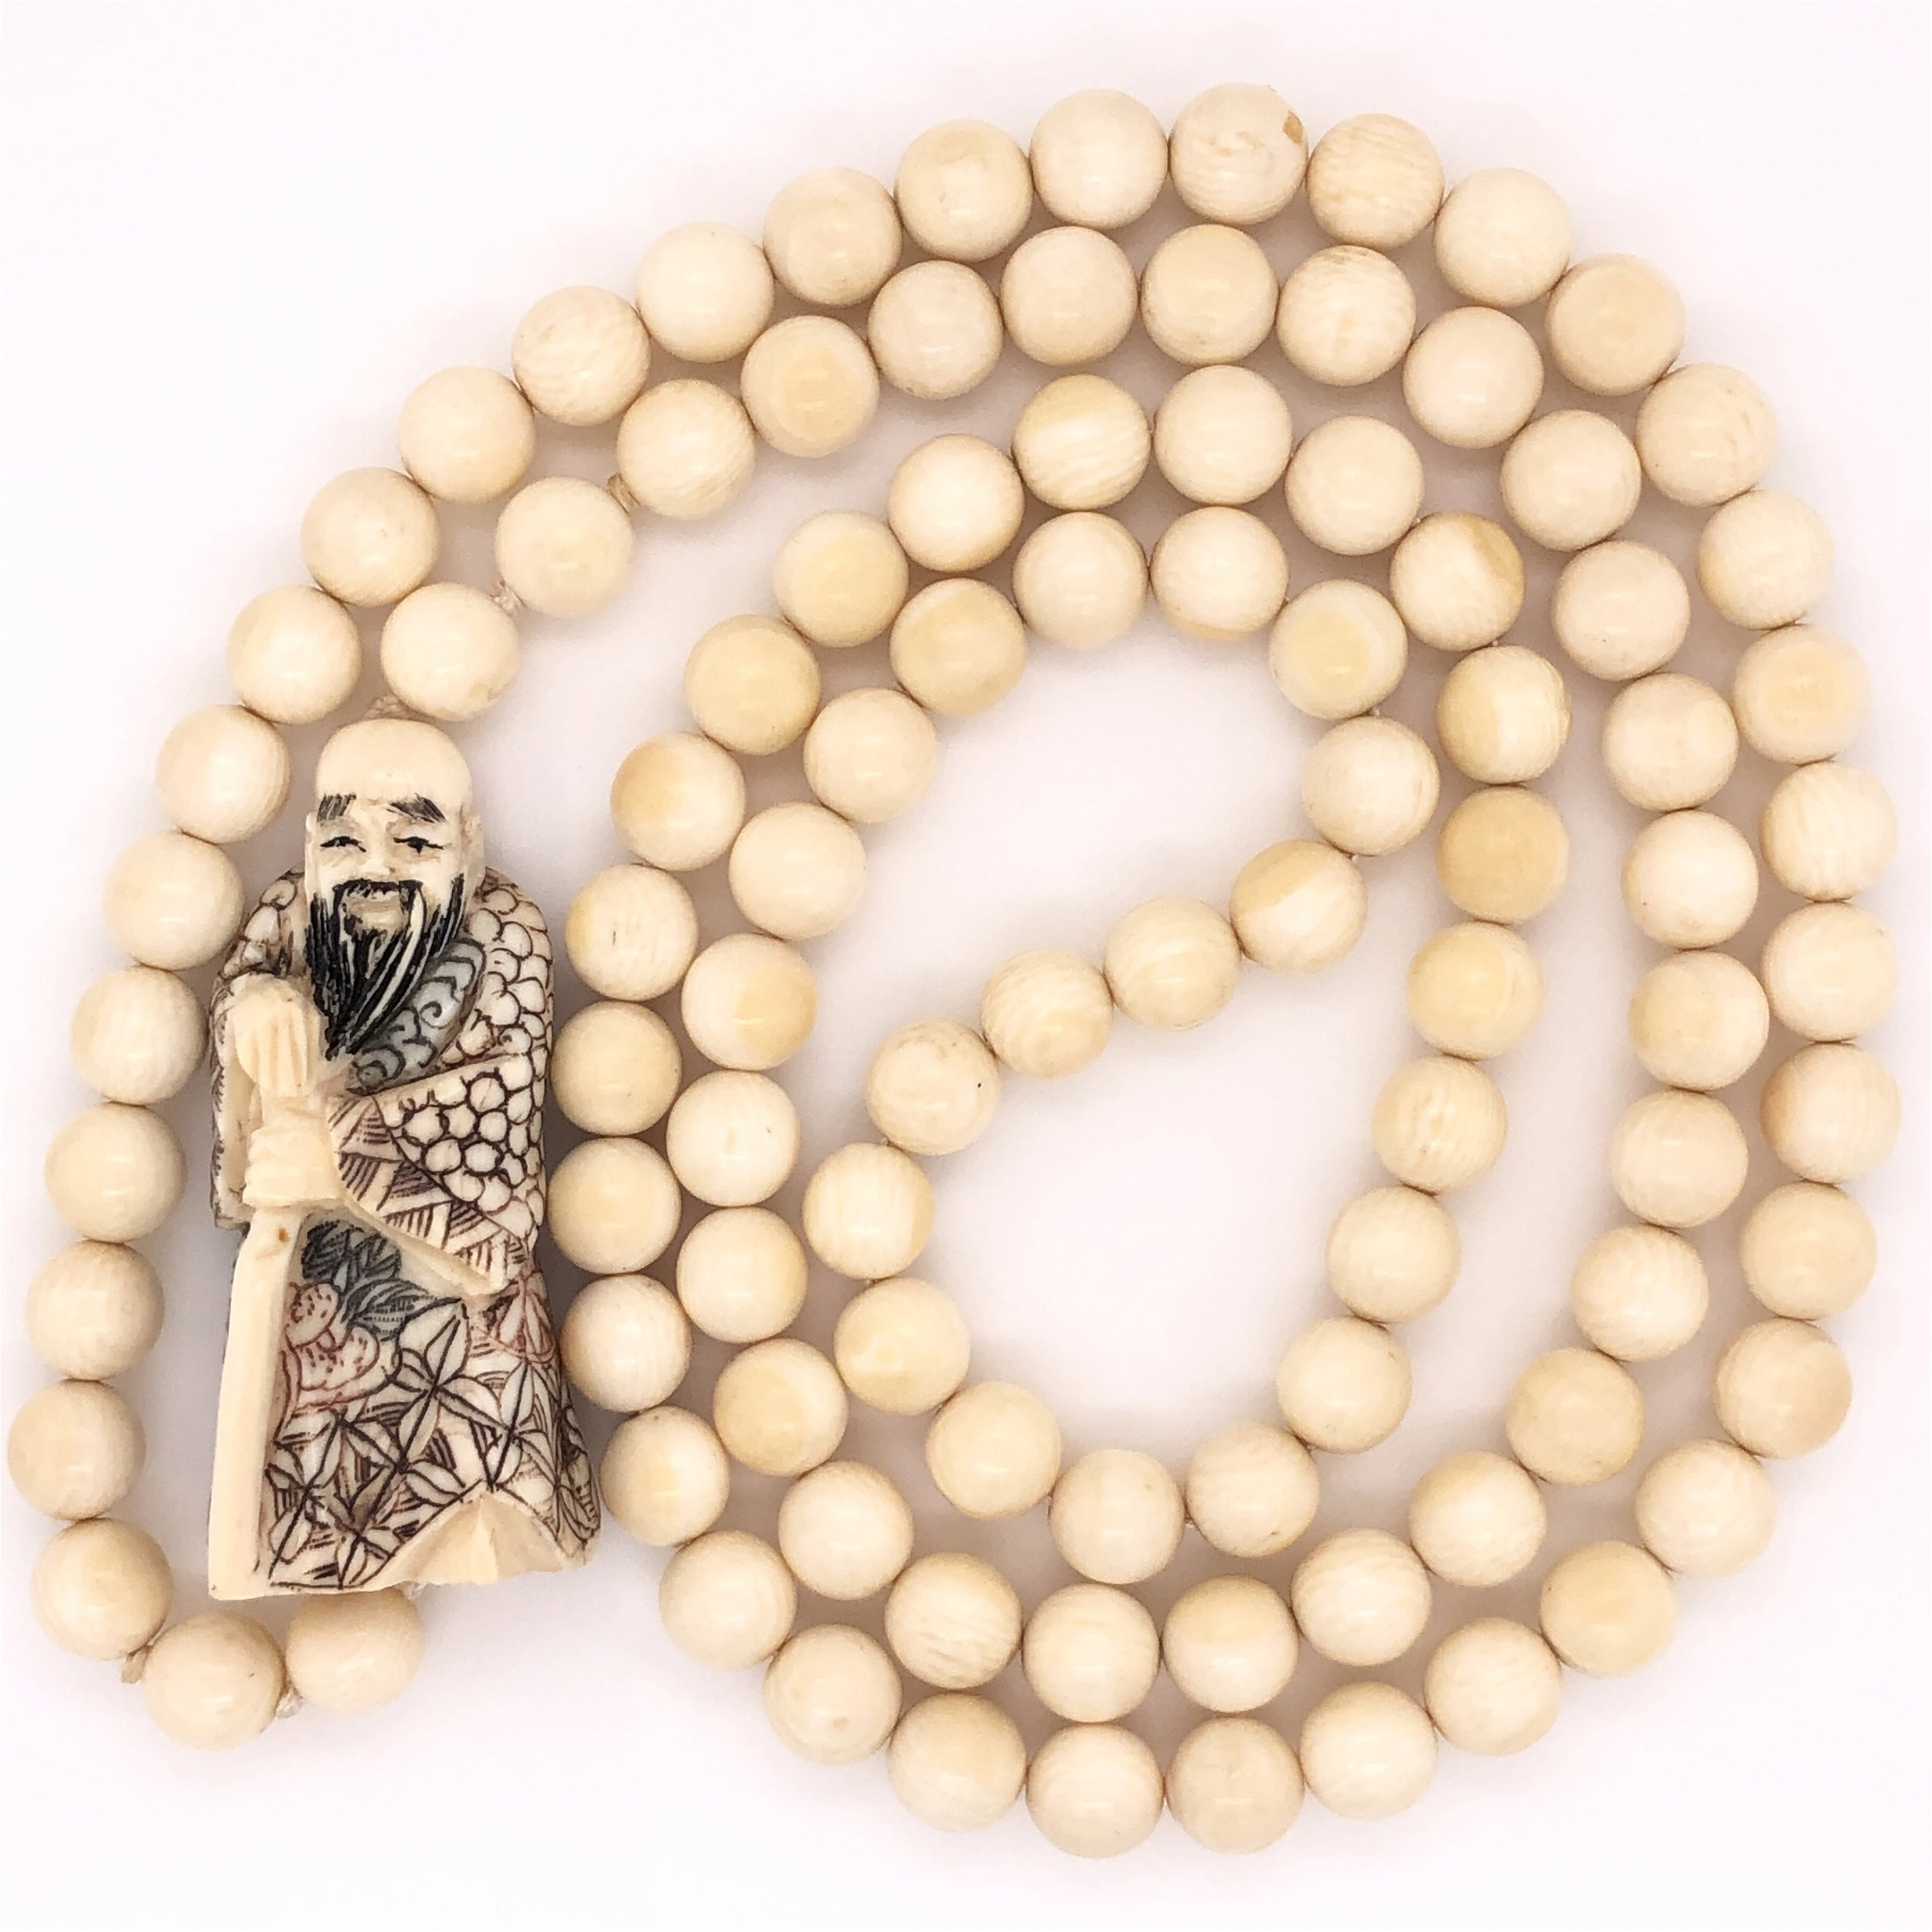 Natural Chinese Bead & Carved Bone Necklace 56.0g, 32" Long